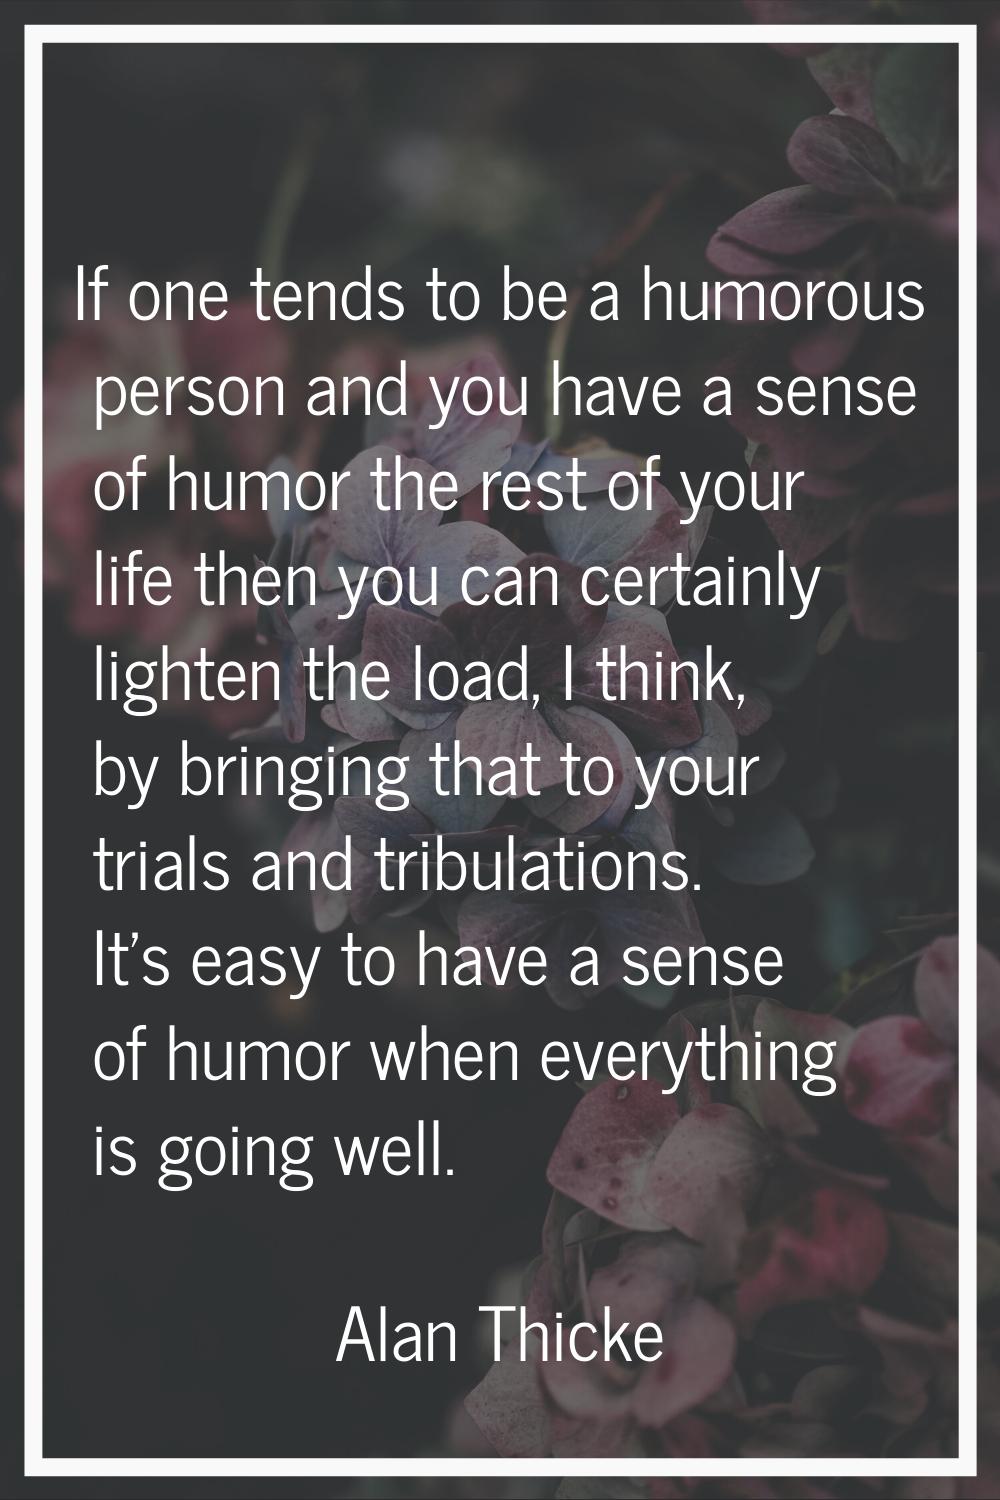 If one tends to be a humorous person and you have a sense of humor the rest of your life then you c